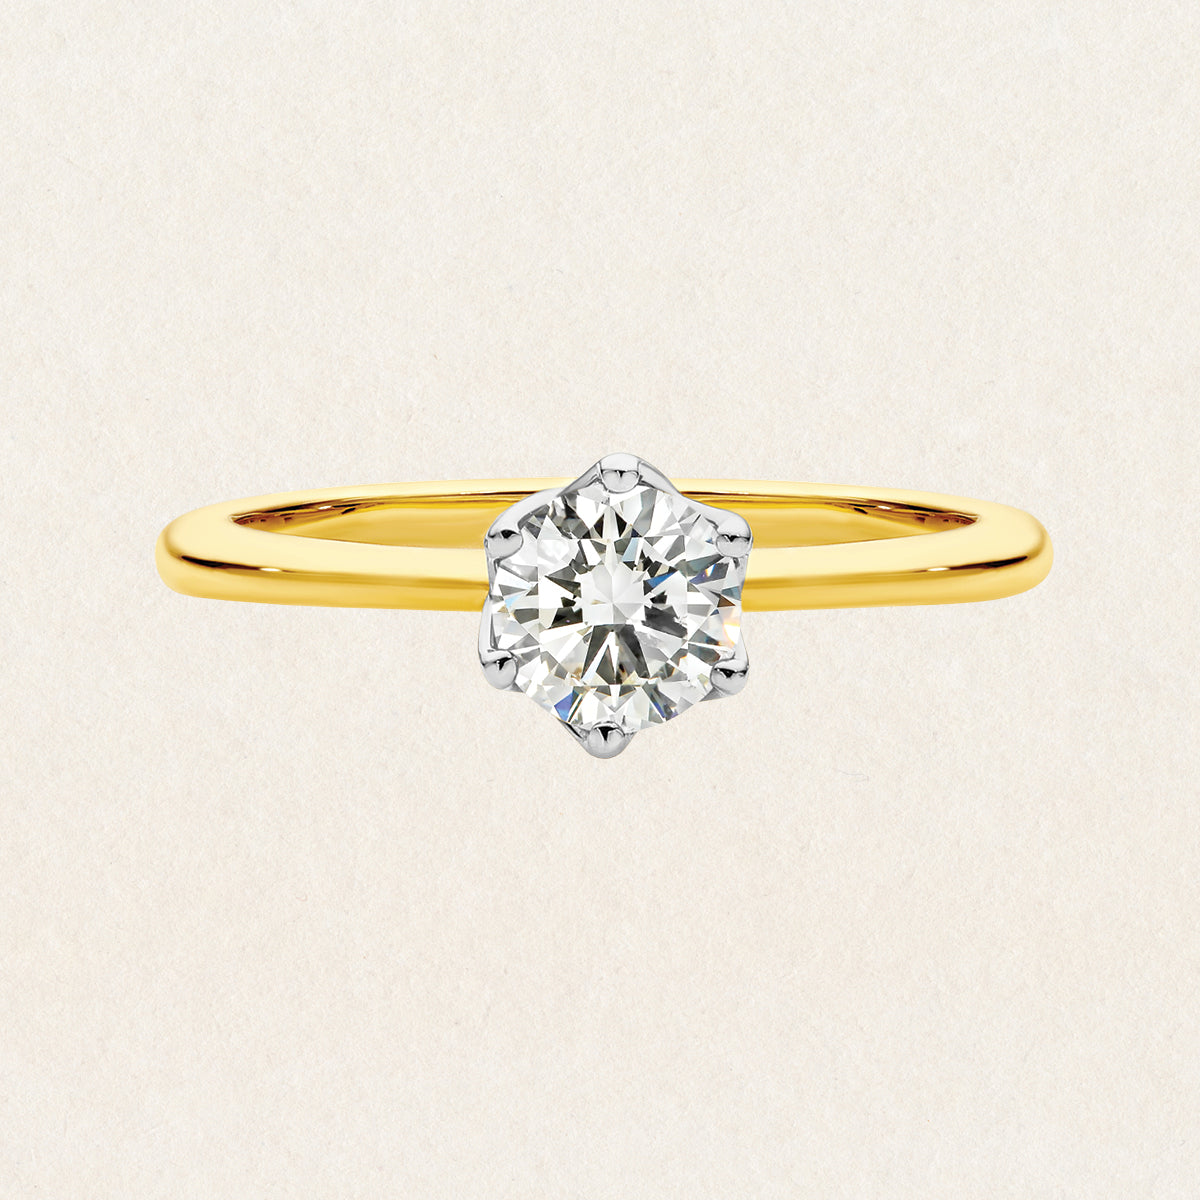 Brilliant round cut 0.75ct lab grown diamond solitaire ring made with 18k yellow and white gold